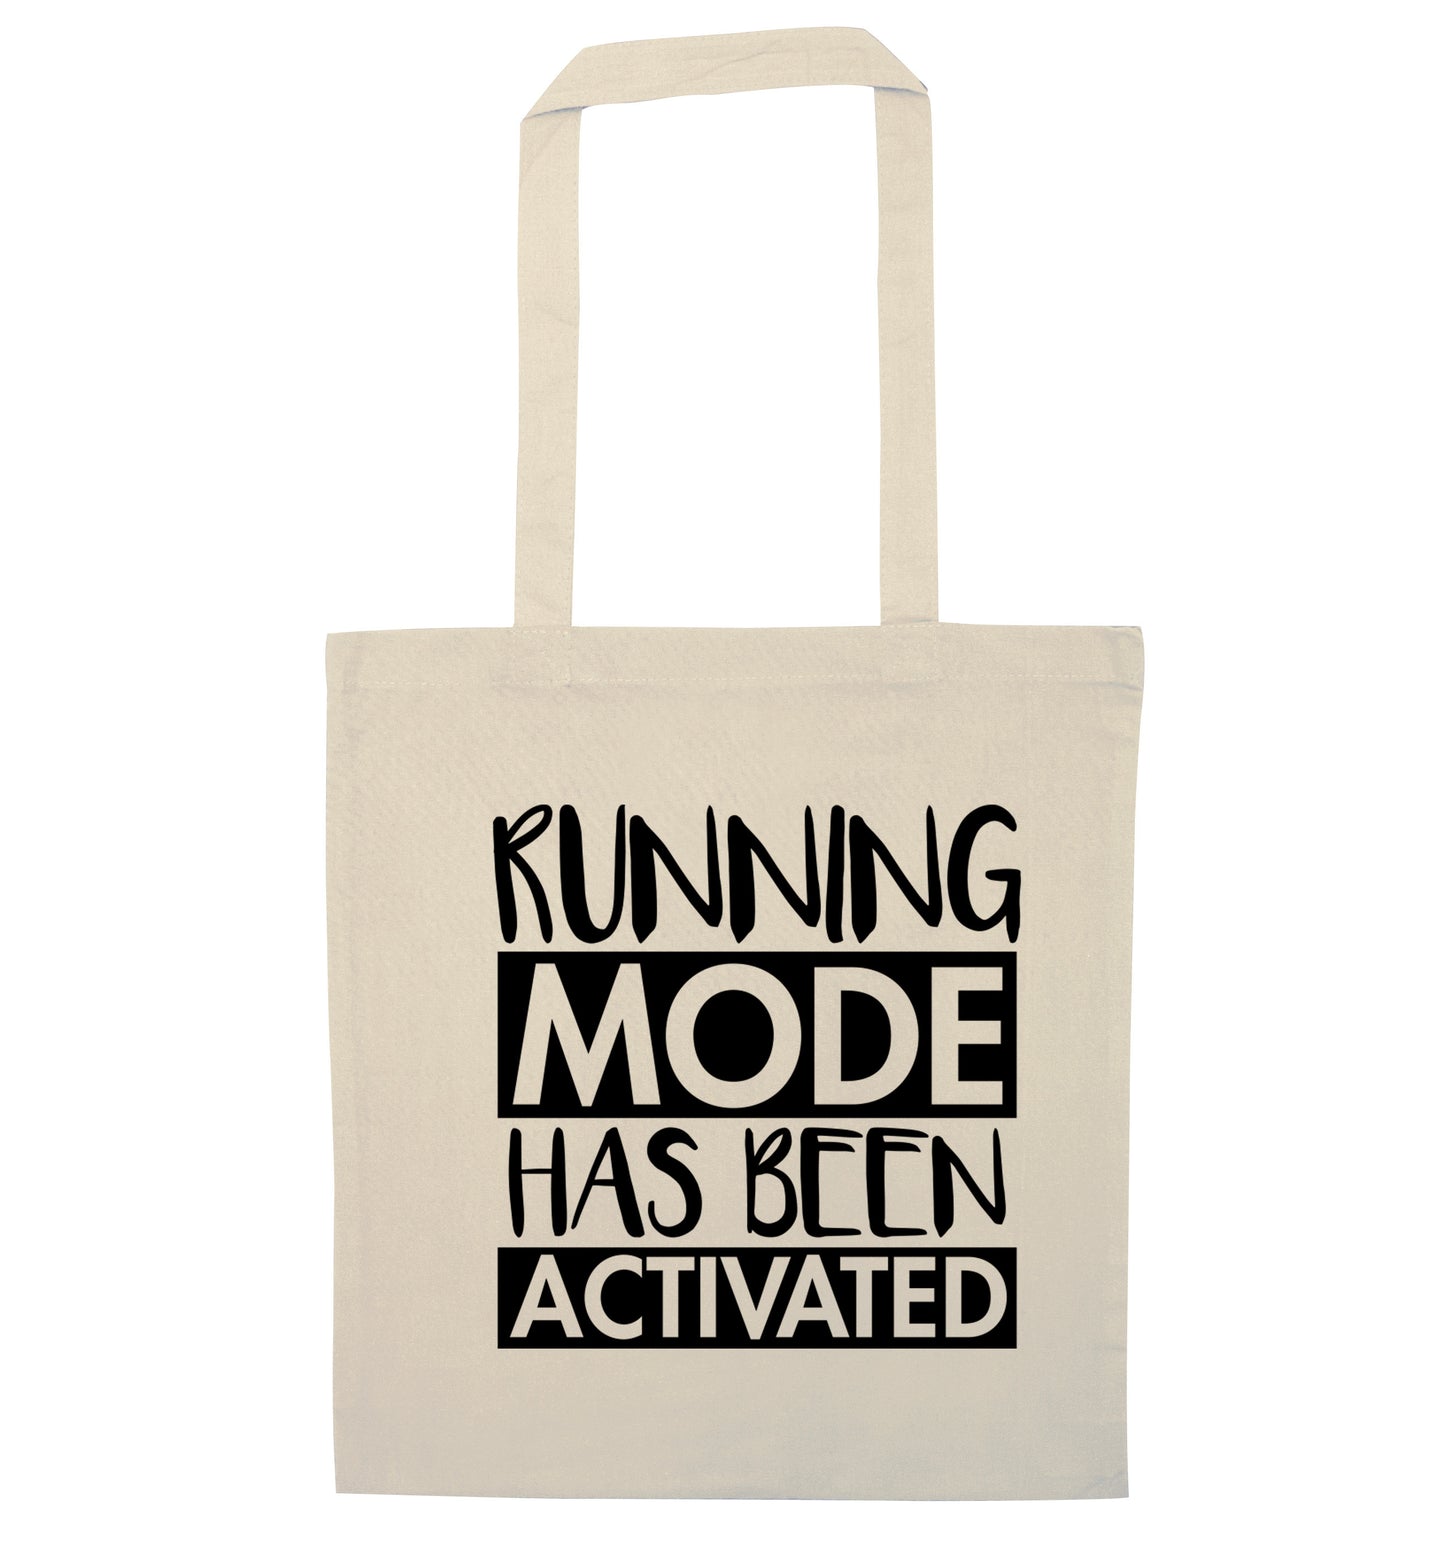 Running mode activated natural tote bag